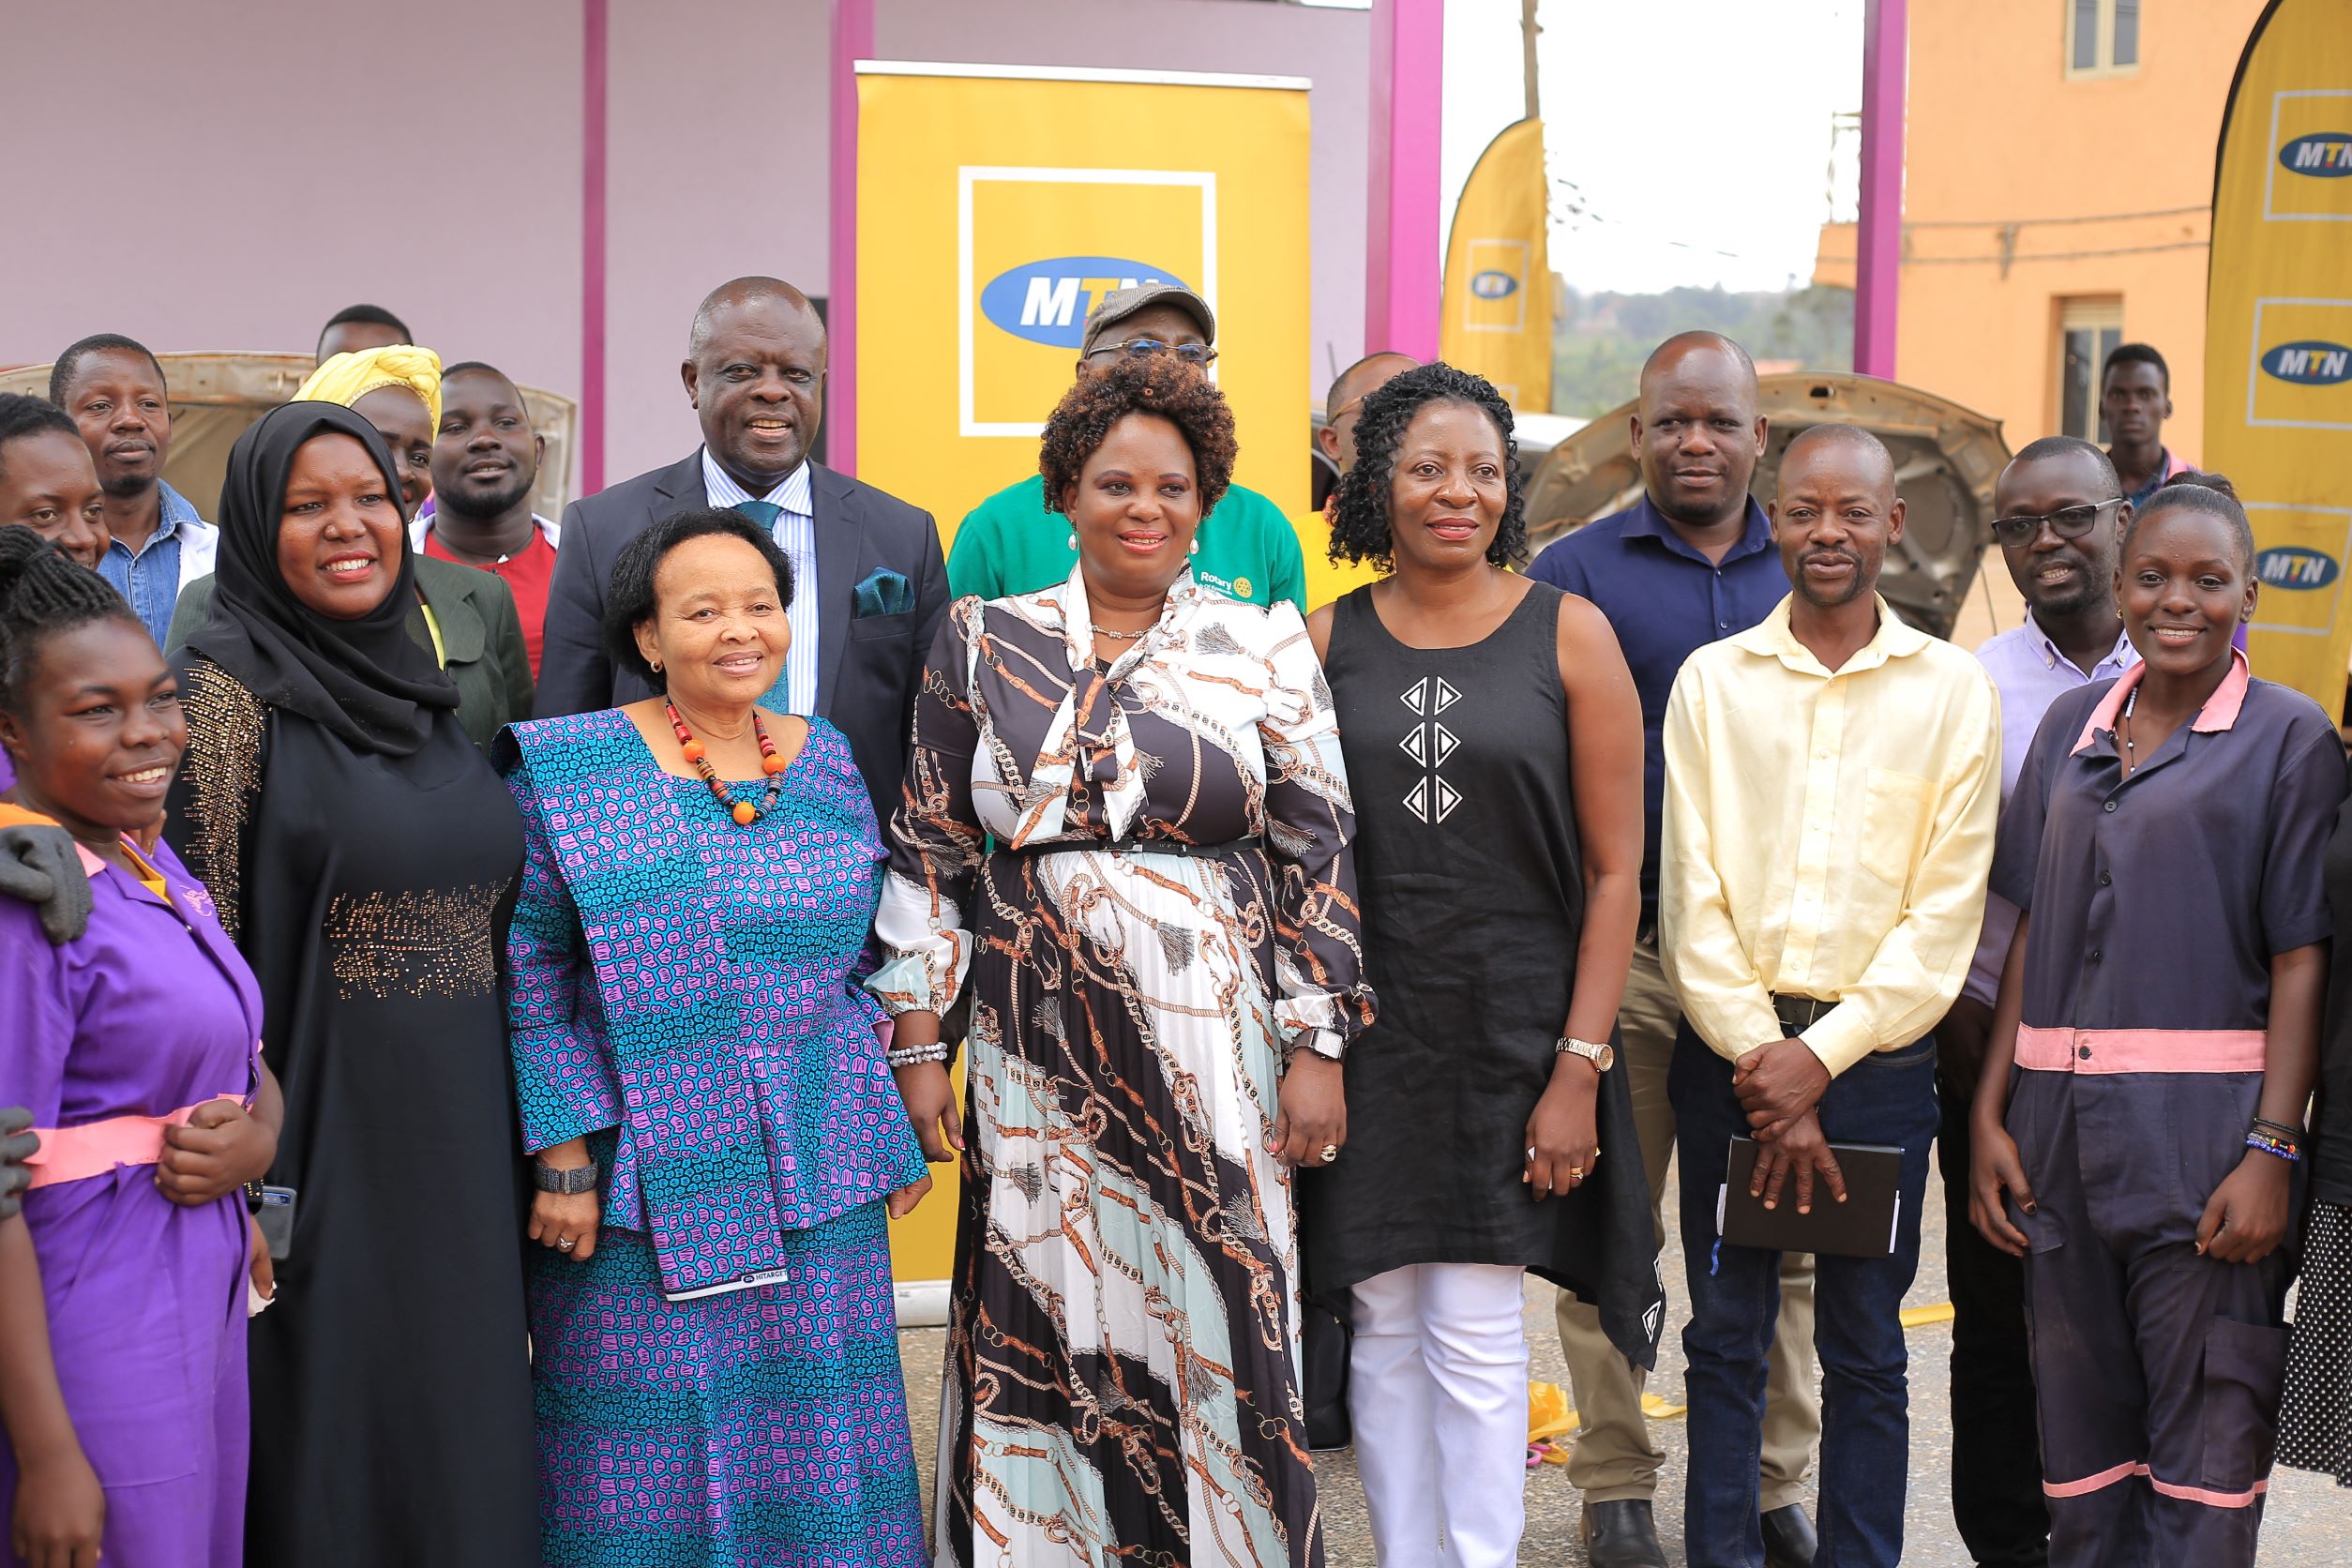 THE OPENING OF THE MTN FOUNDATION SKILLING FACILITY TO EXTEND VOCATIONAL AND BUSINESS SKILLS TO THE GIRL CHILD